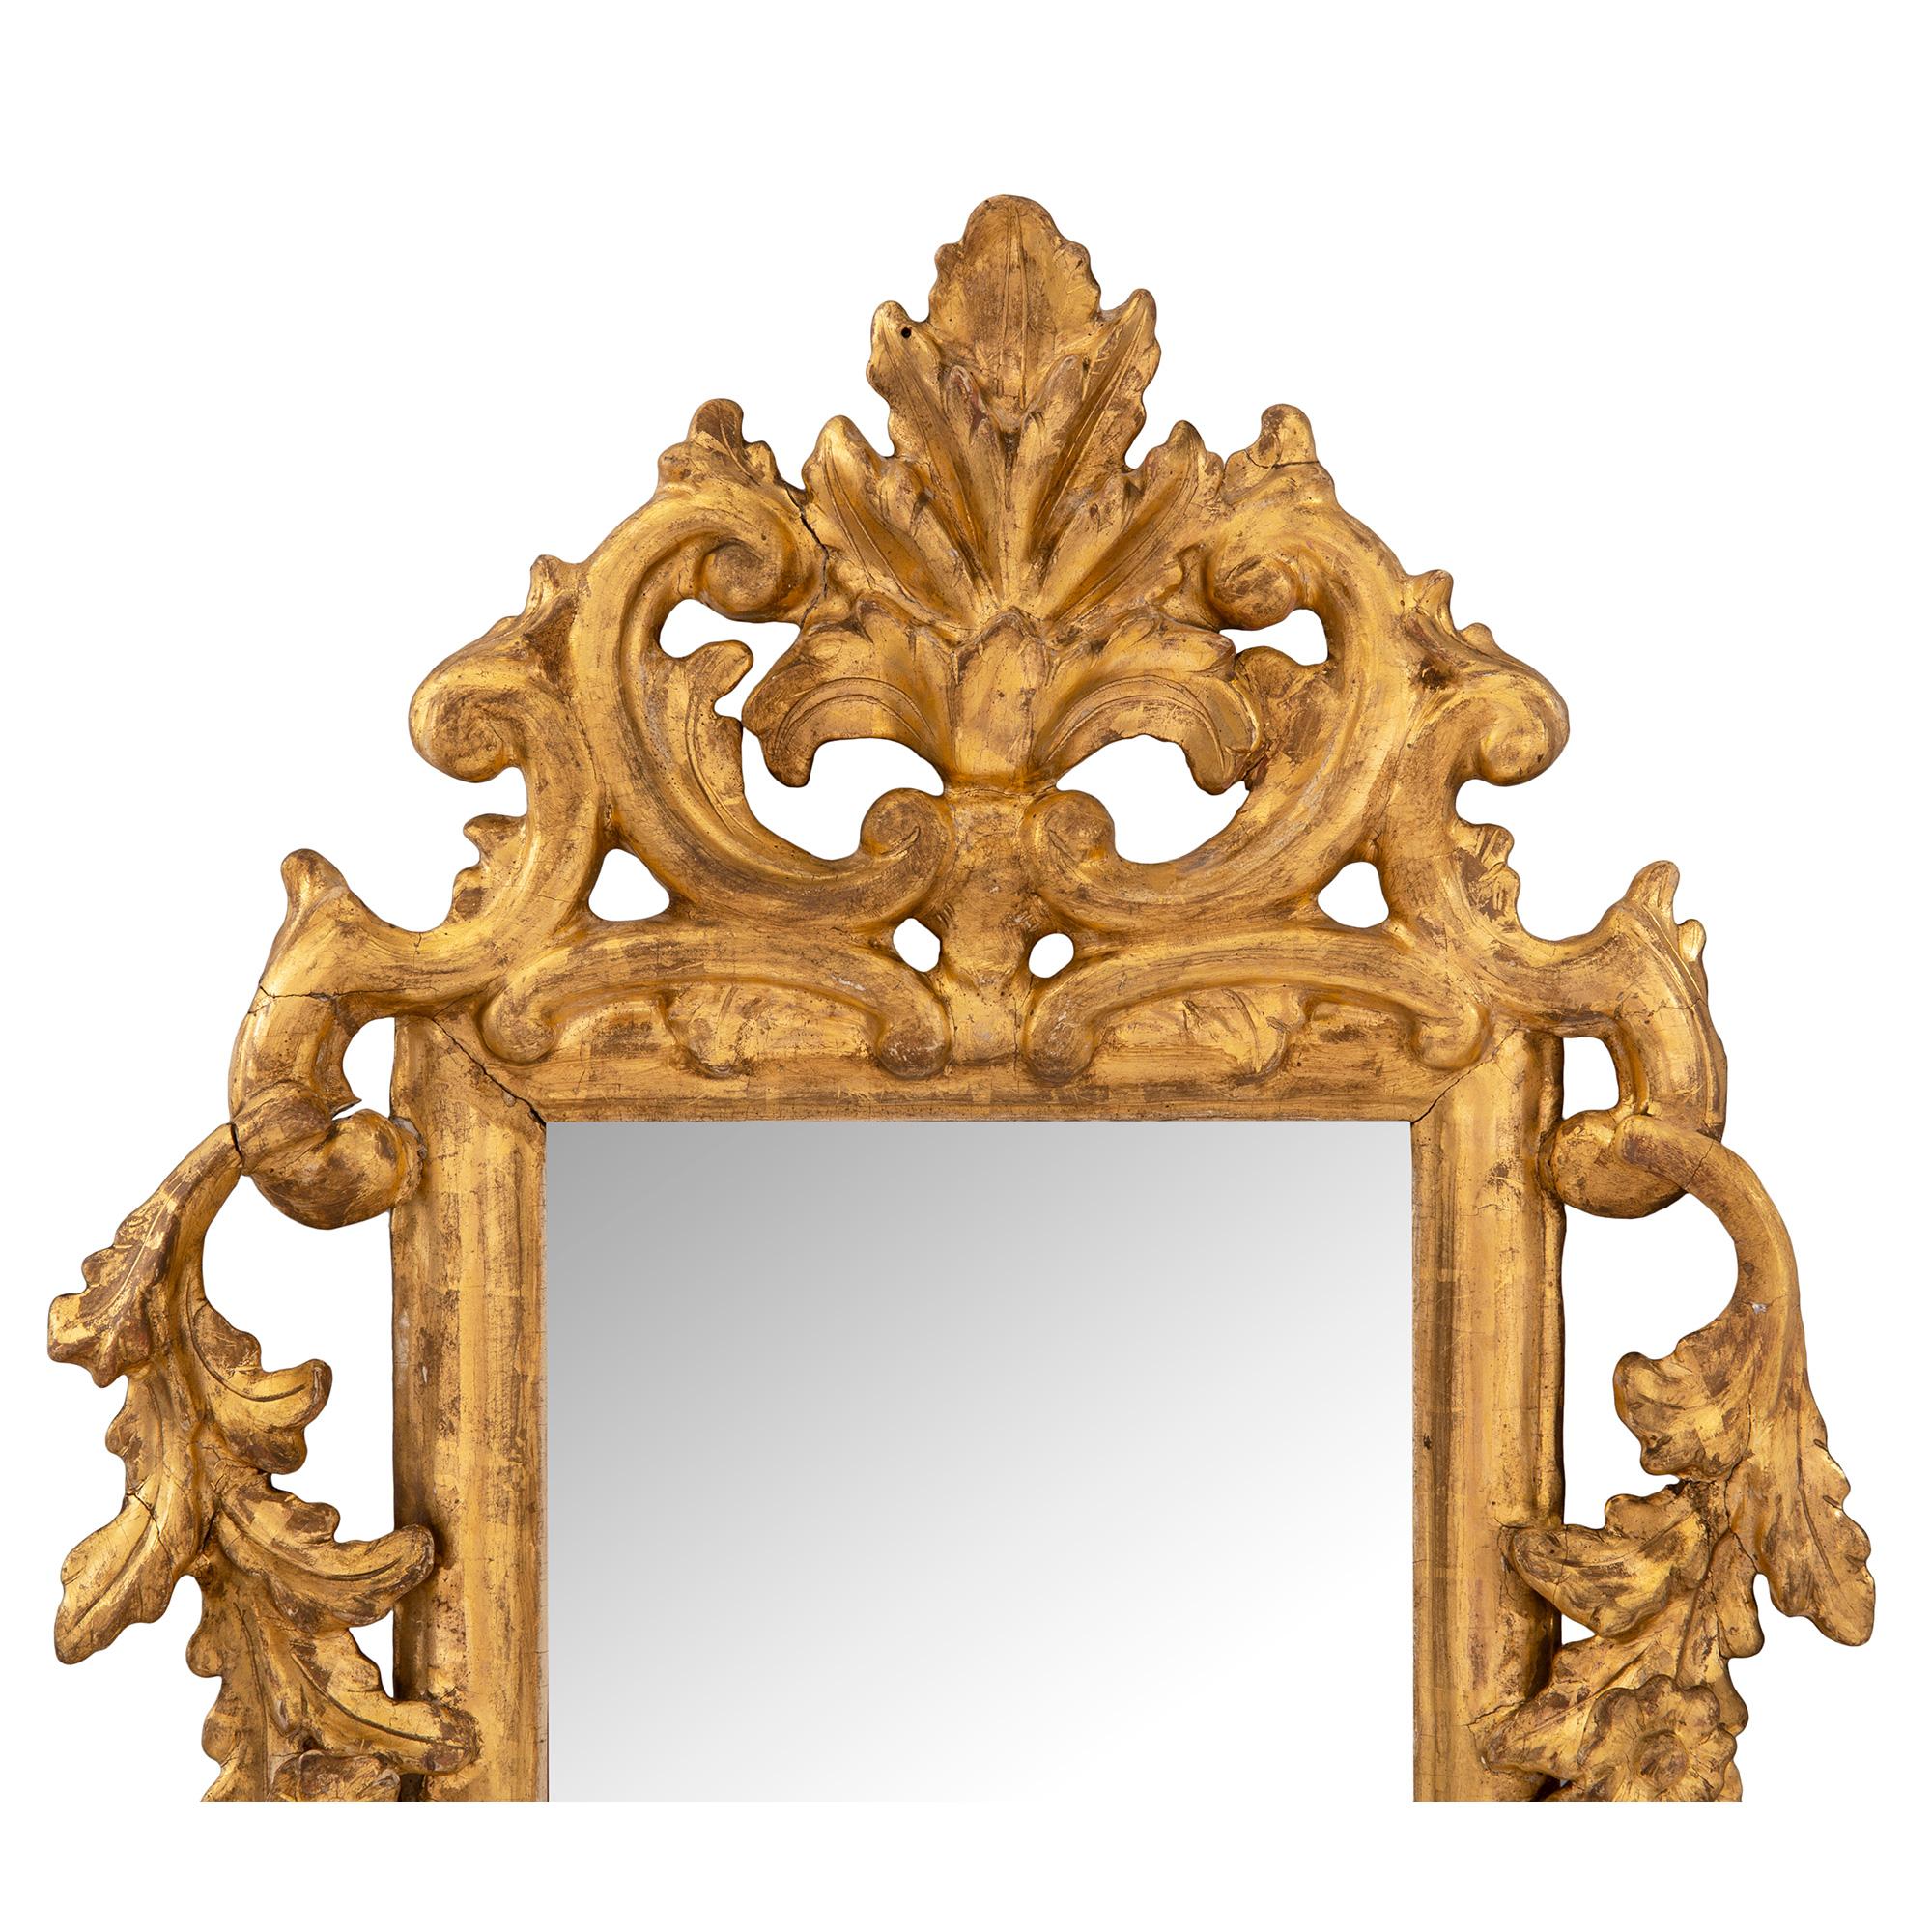 Pair of Italian 18th Century Rococo Style Giltwood Mirrors In Good Condition For Sale In West Palm Beach, FL